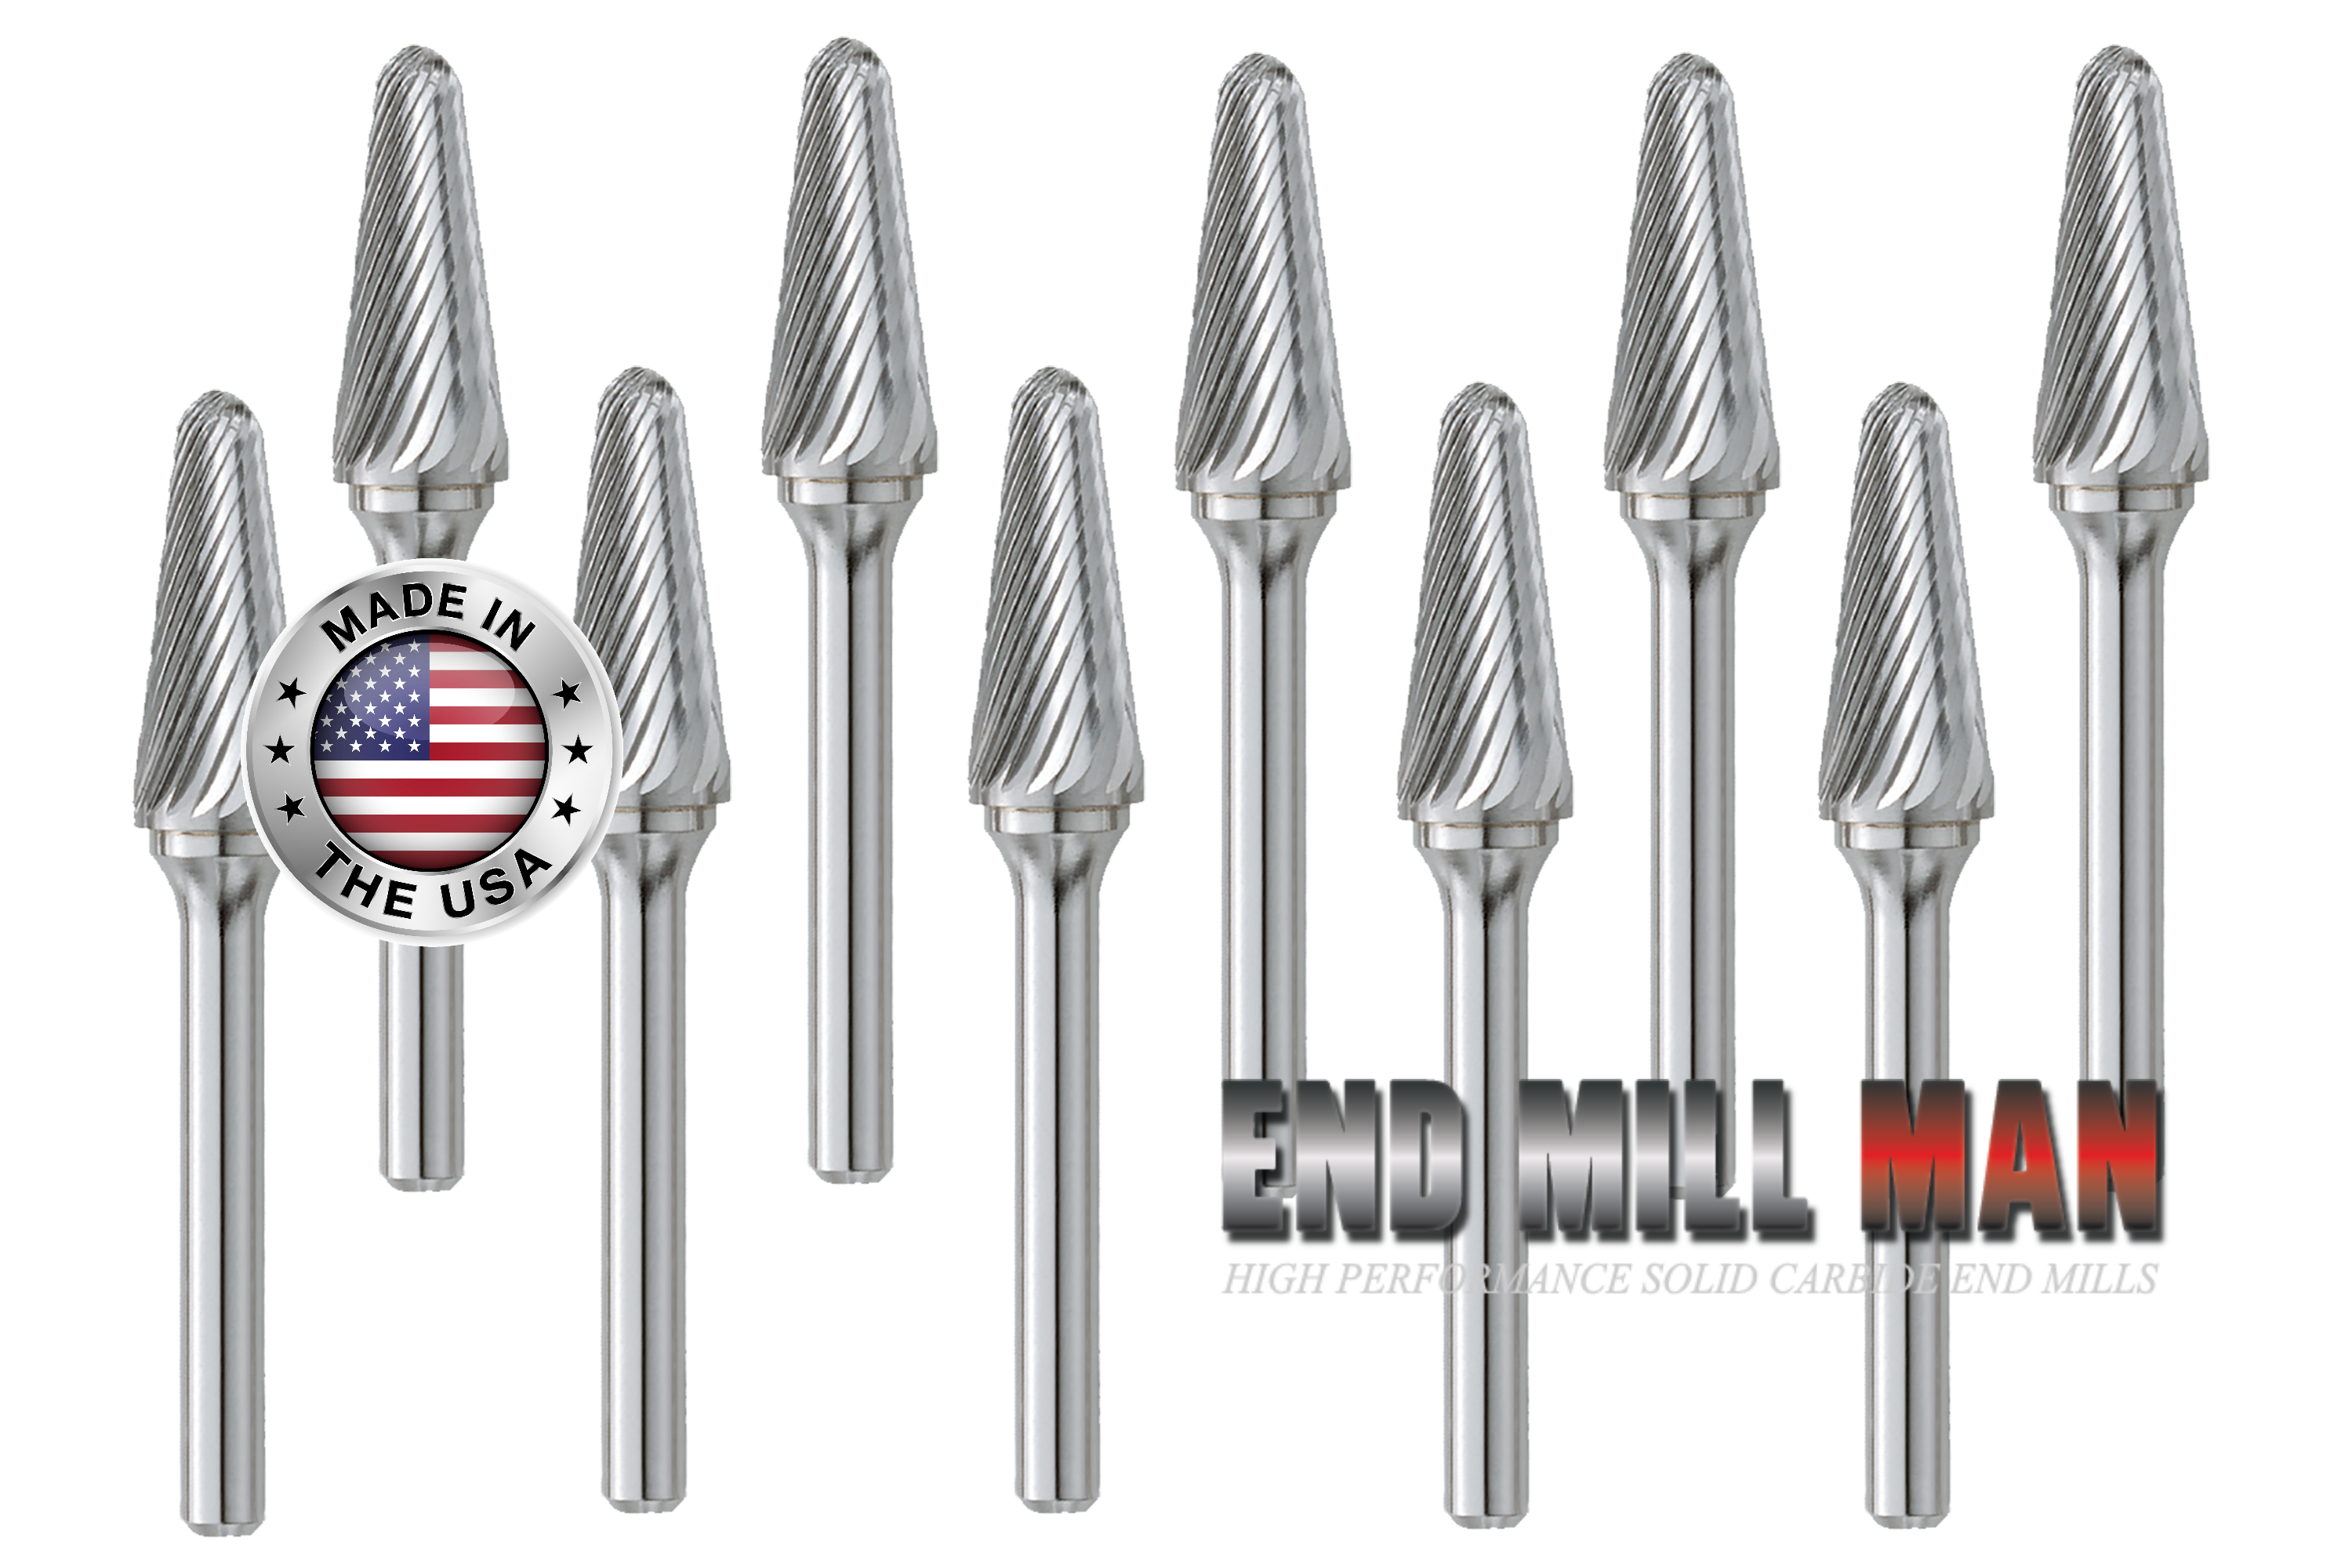 SL-41 14° Burr (10 Pack) 1/8" x 3/8" Cut Length x 1-1/2" OAL on 1/8" Shanks - The End Mill Store 